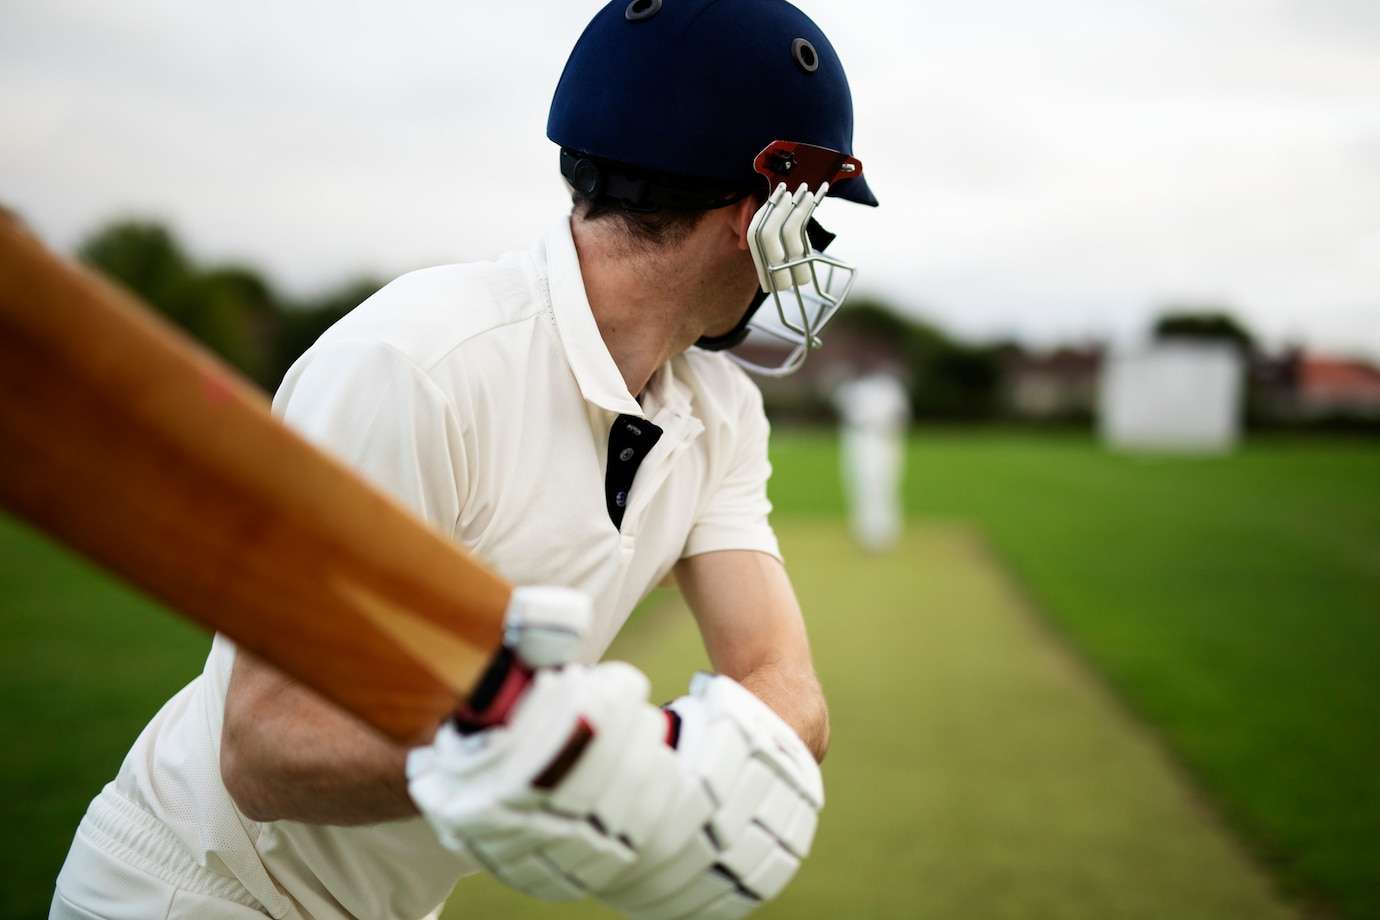 Gambling on Cricket: Where to Bet Safely as an Indian Punter